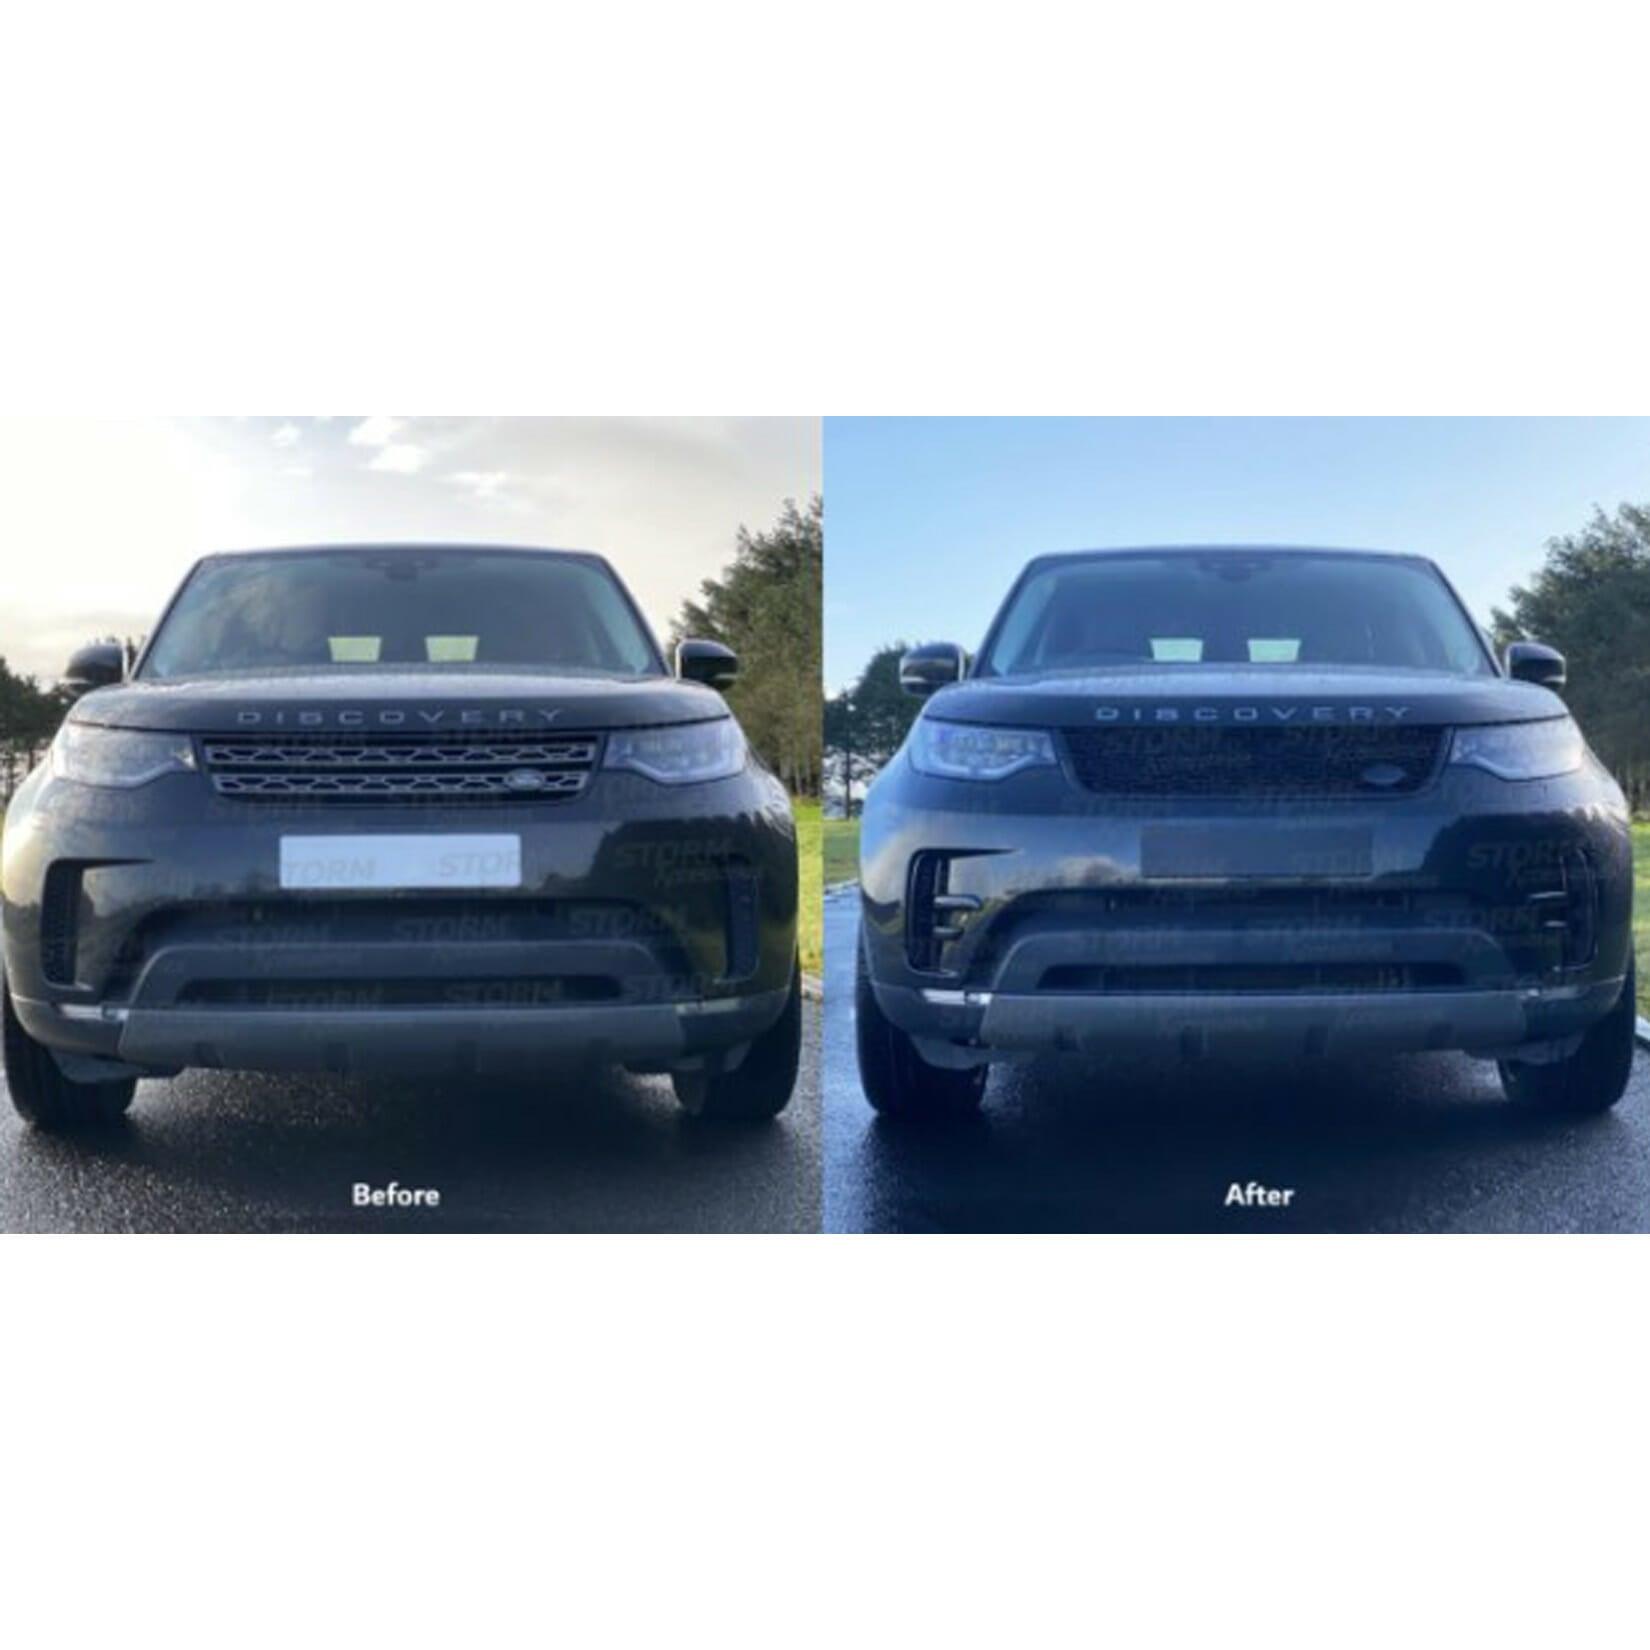 LAND ROVER DISCOVERY 5 2017 ON - DYNAMIC FRONT GRILLE - BLACK - Storm Xccessories2